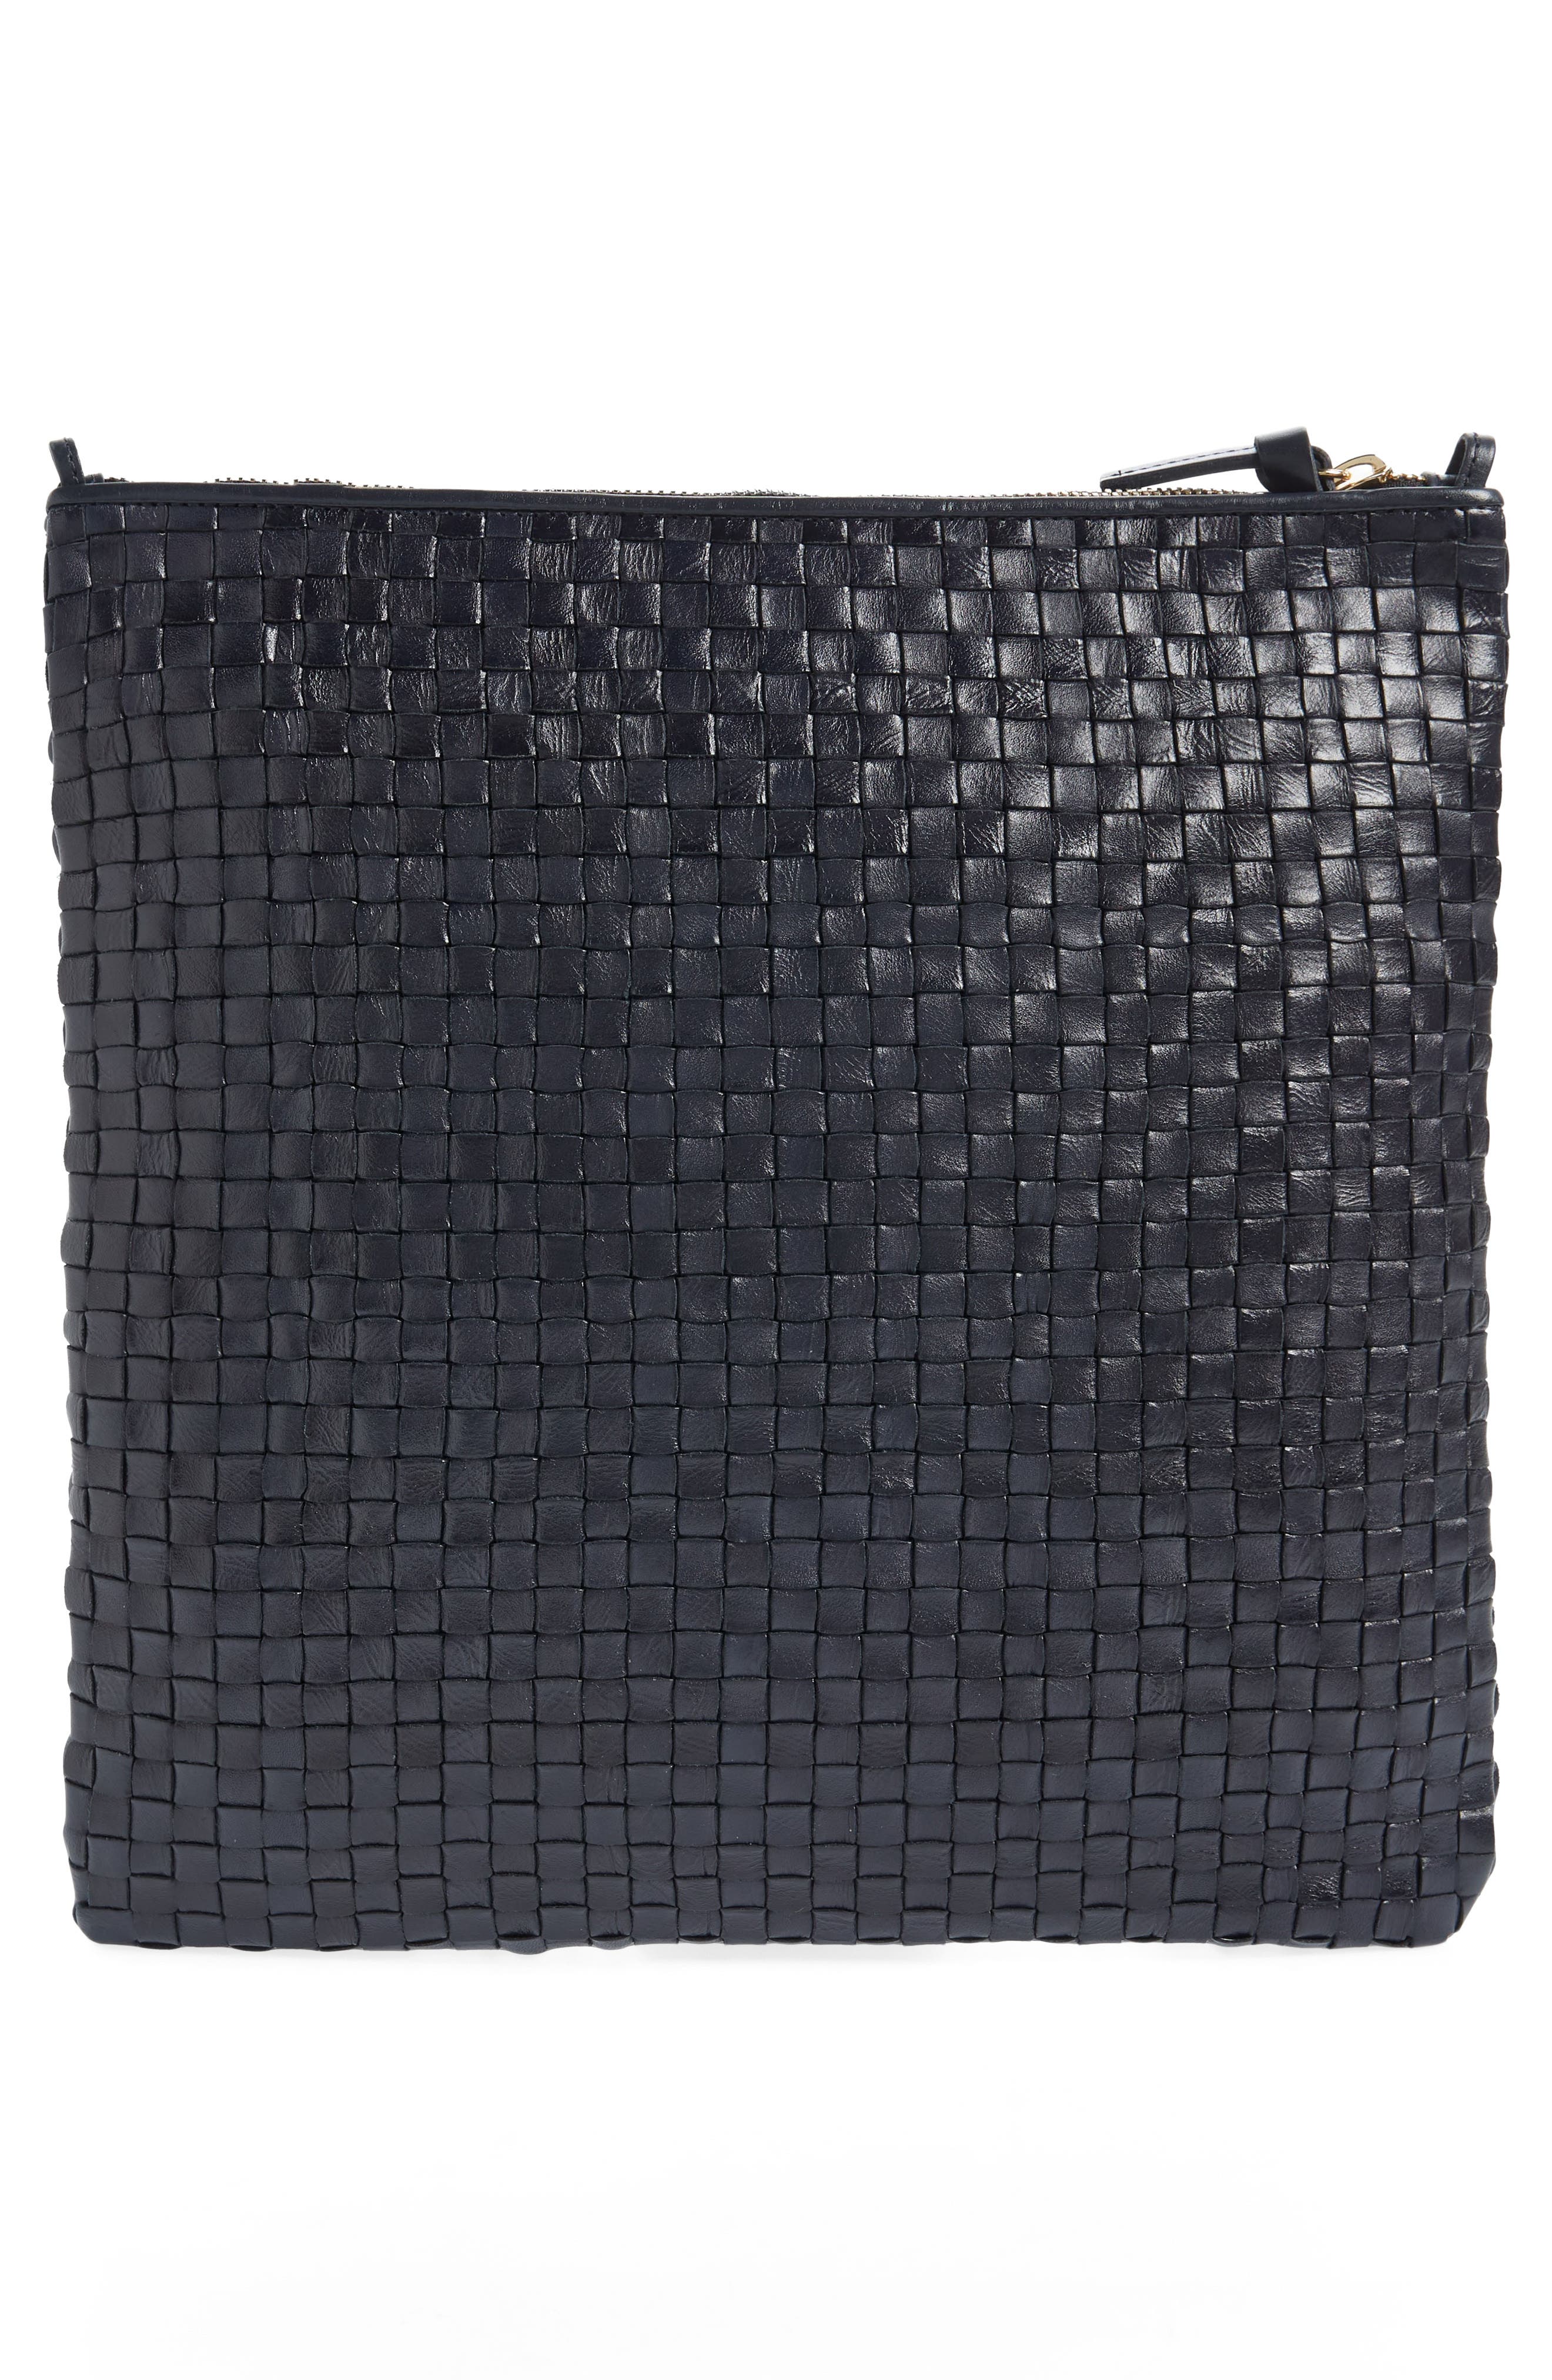 Clare V. Foldover Clutch with Tabs - Twilight Woven Checker